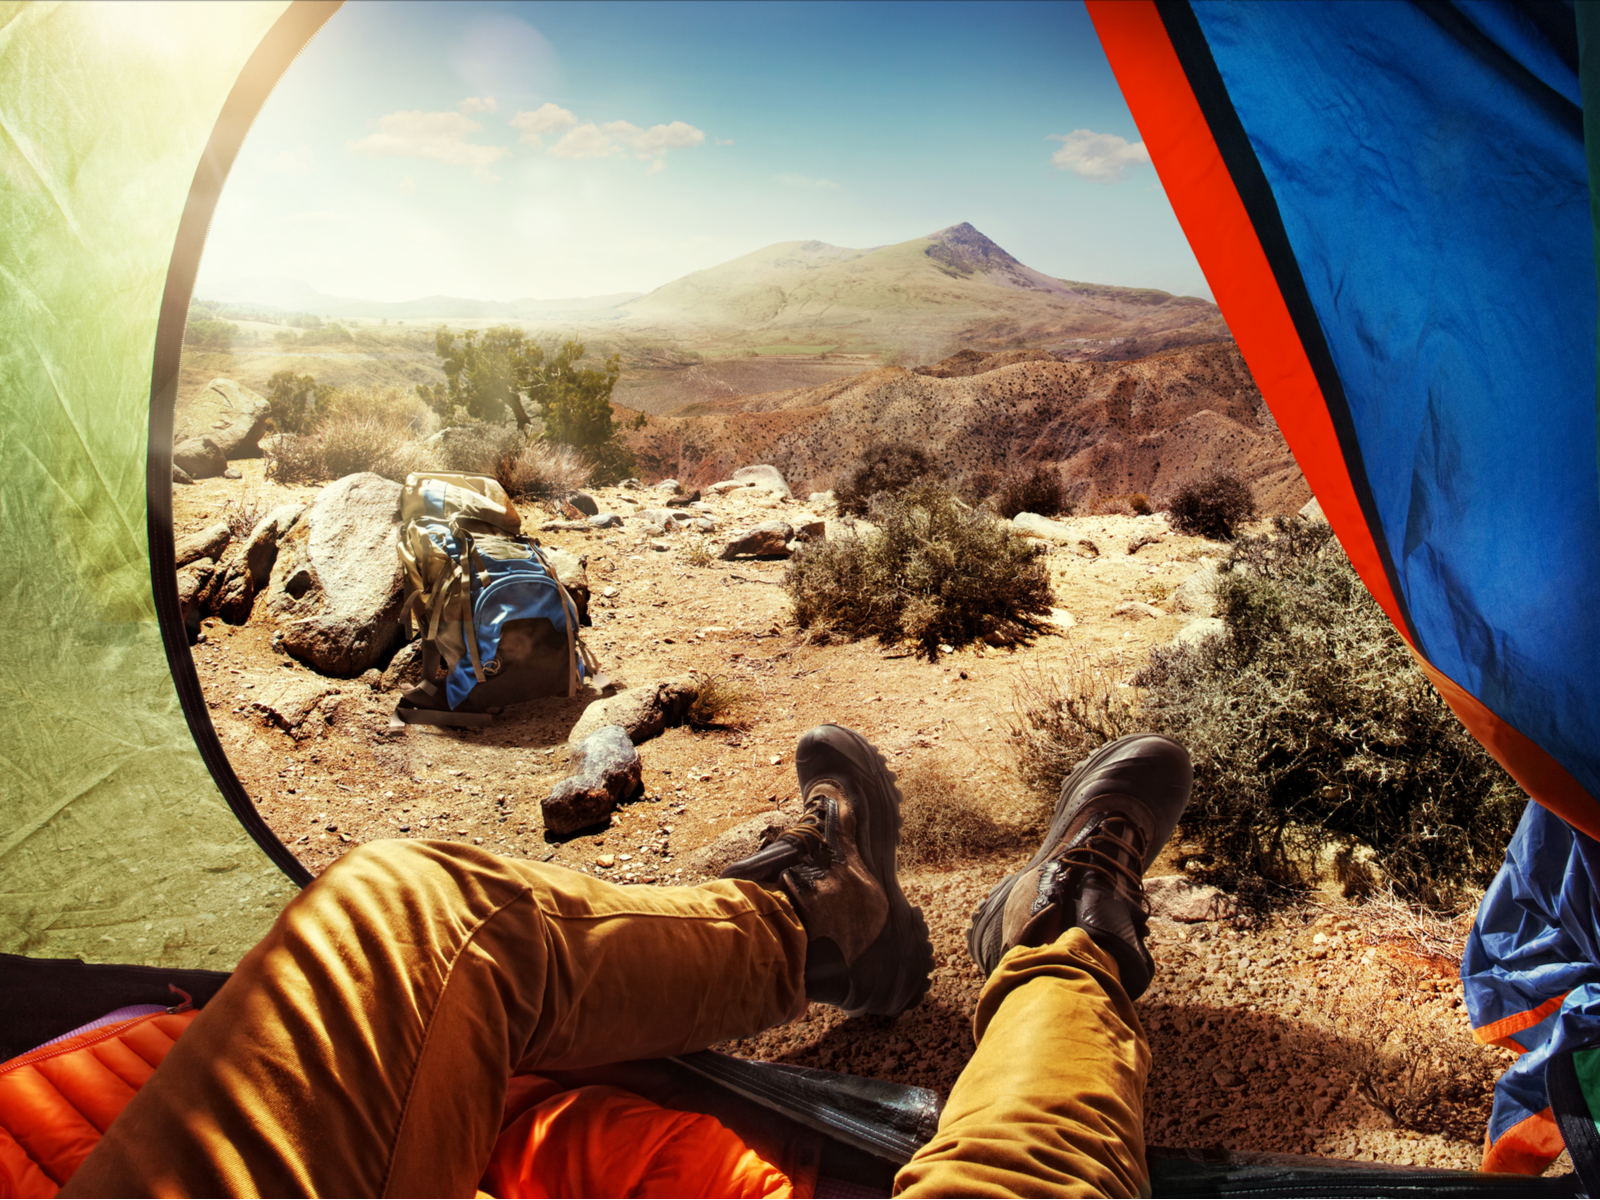 Guy with hiking boots and pants hanging out of one of the best one-man tents in the desert overlooking a mountain